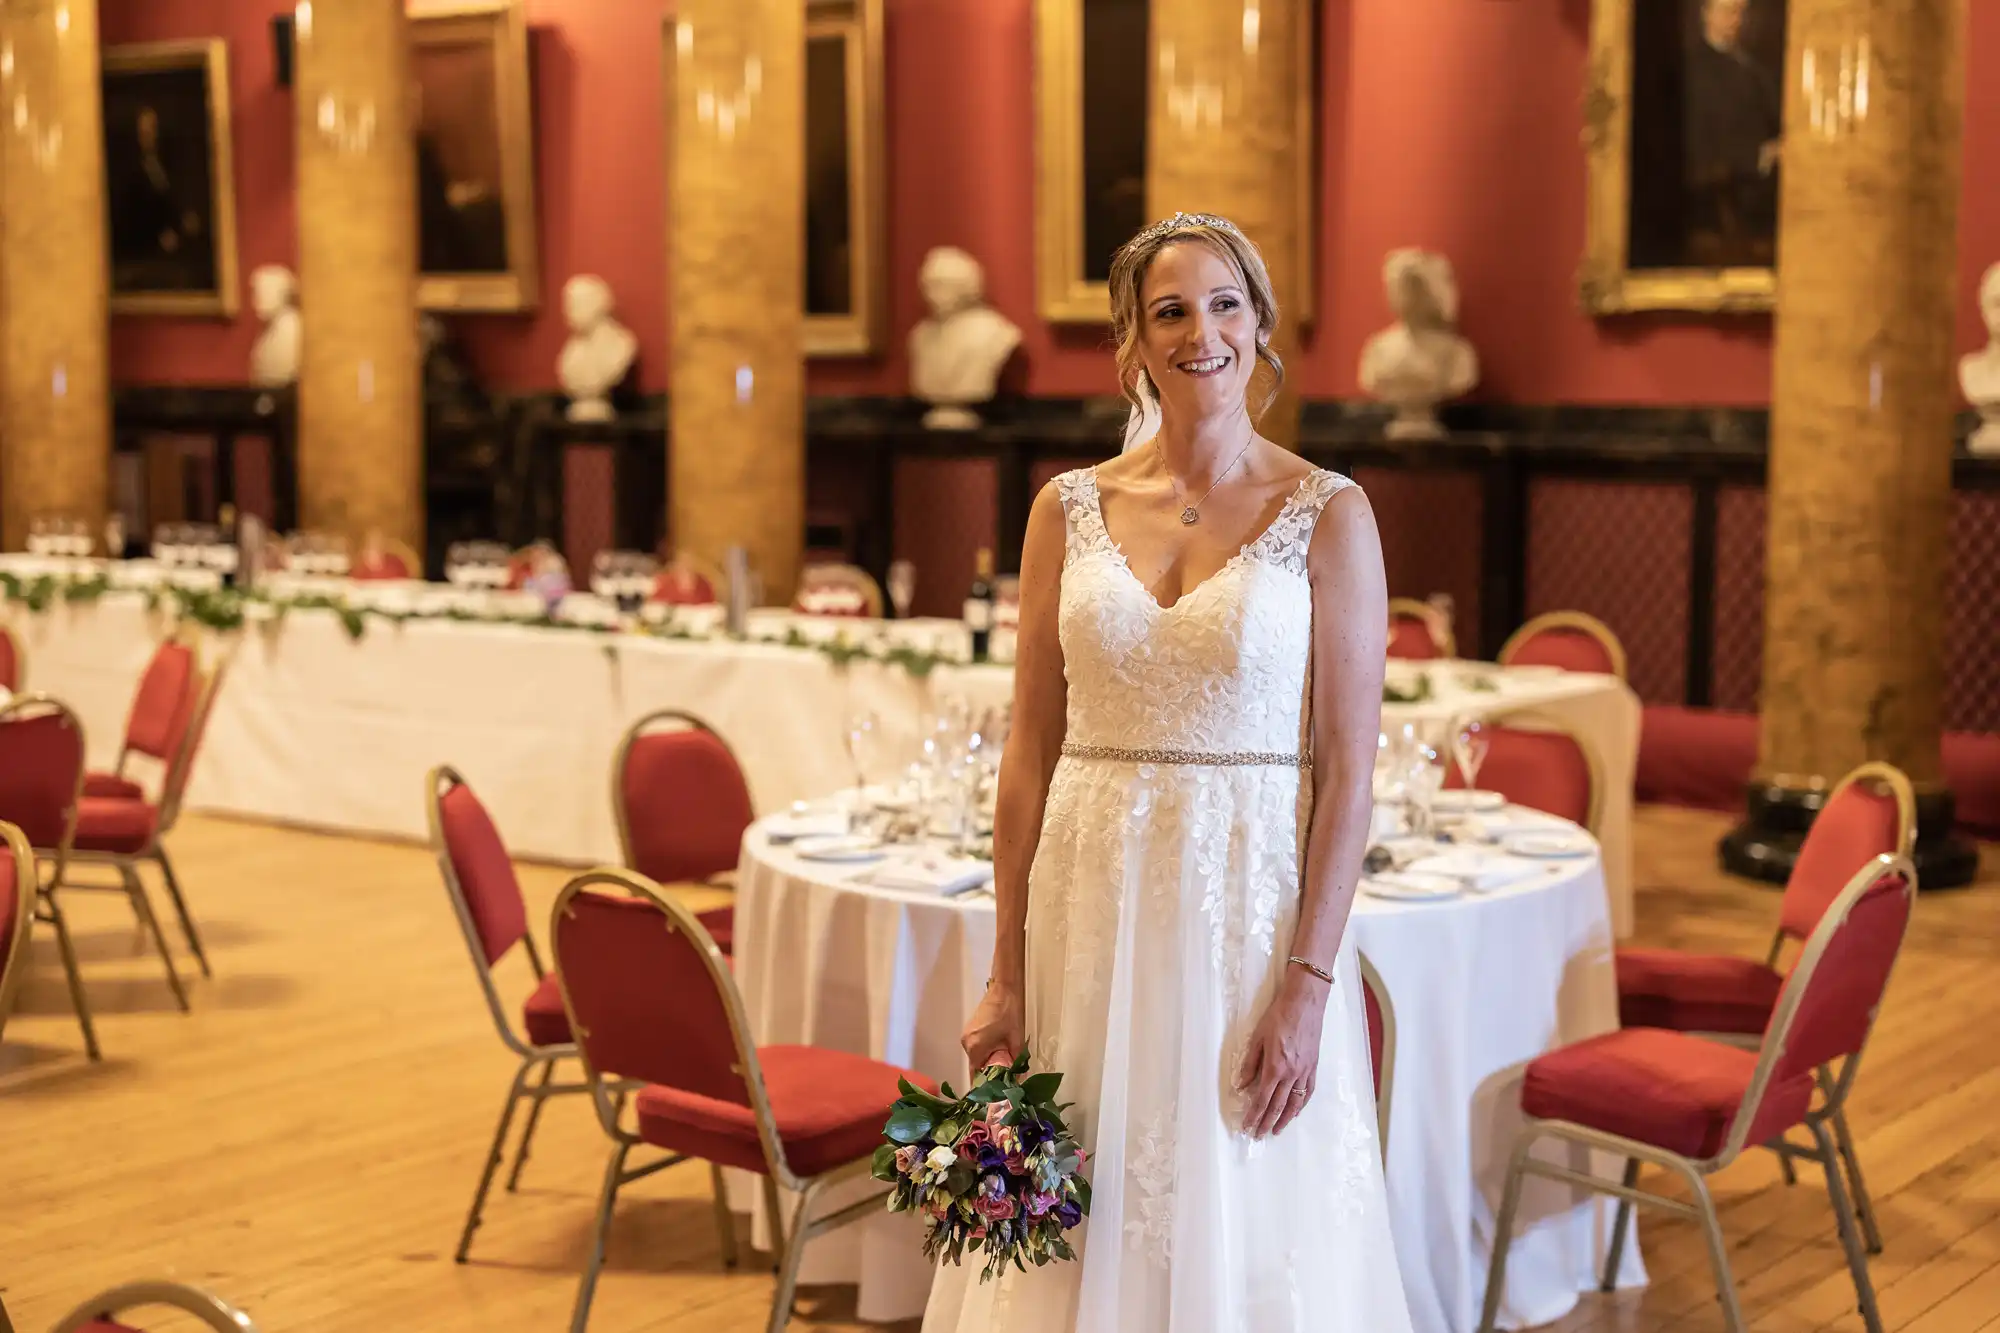 A bride in a white wedding dress stands smiling, holding a bouquet in a hall with red chairs and a long table decorated for a reception.